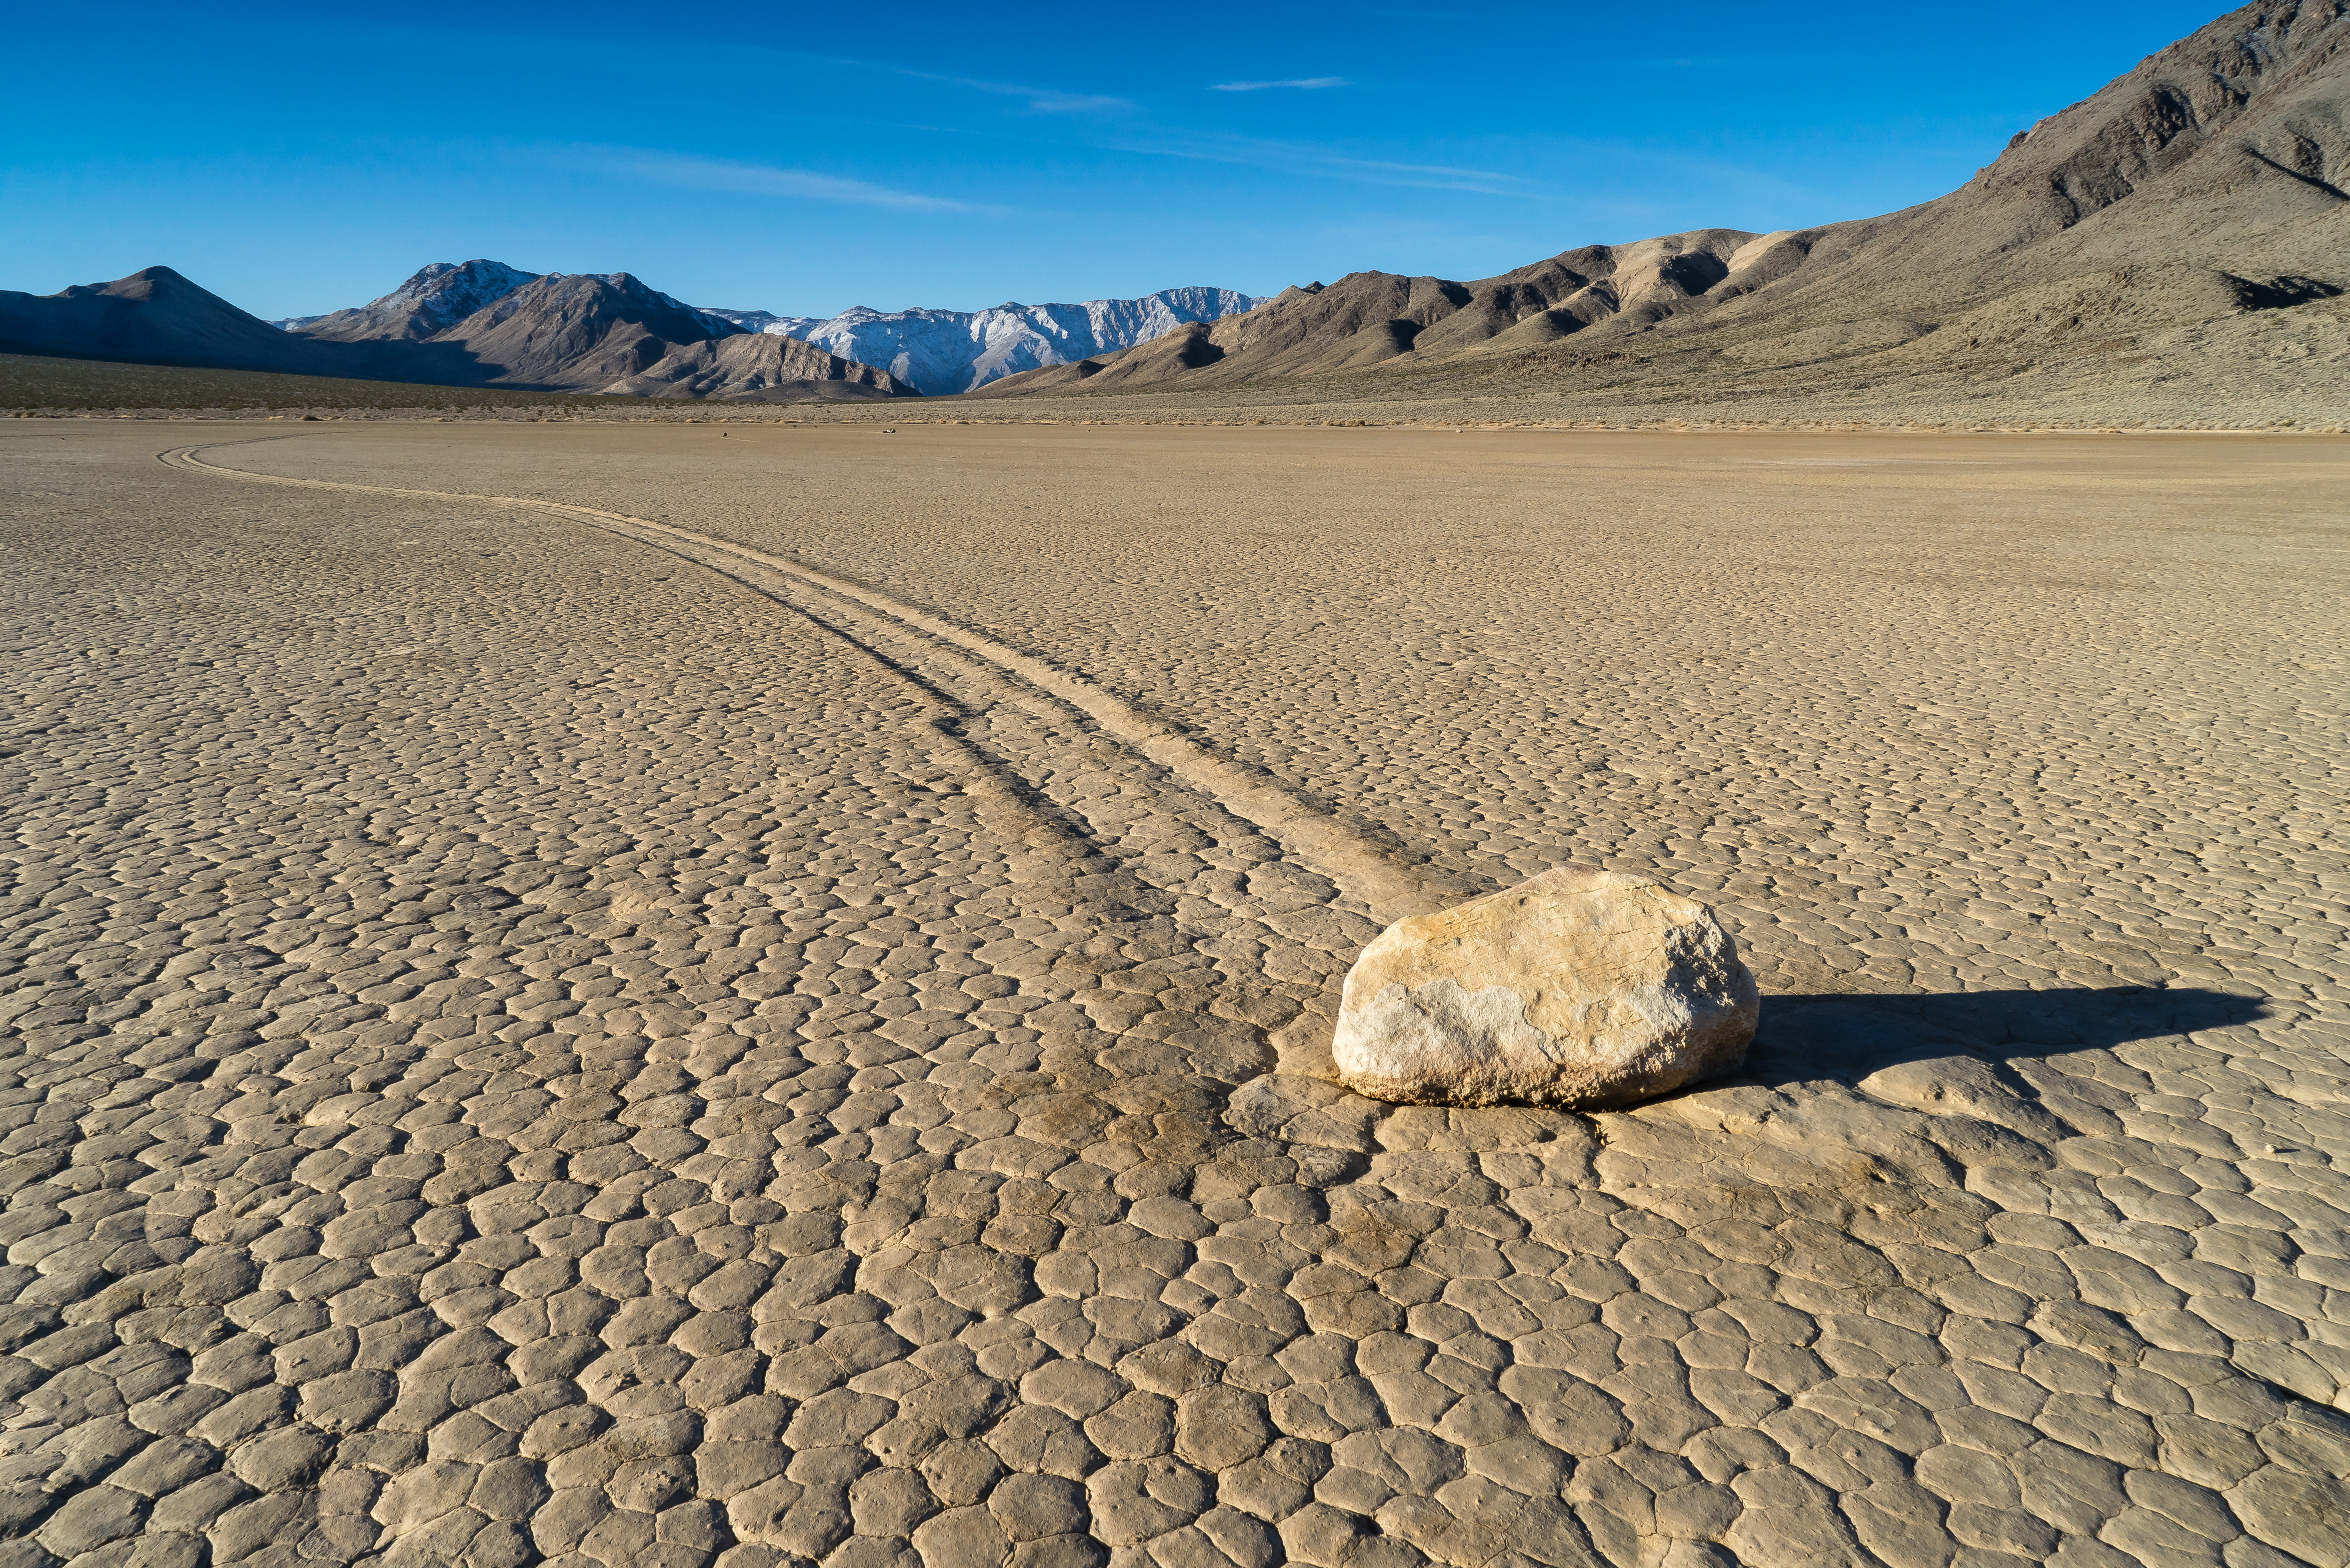 Magical Wonders to See During a Family Vacation - Sailing Stone Racetrack Playa in Death Valley National Park